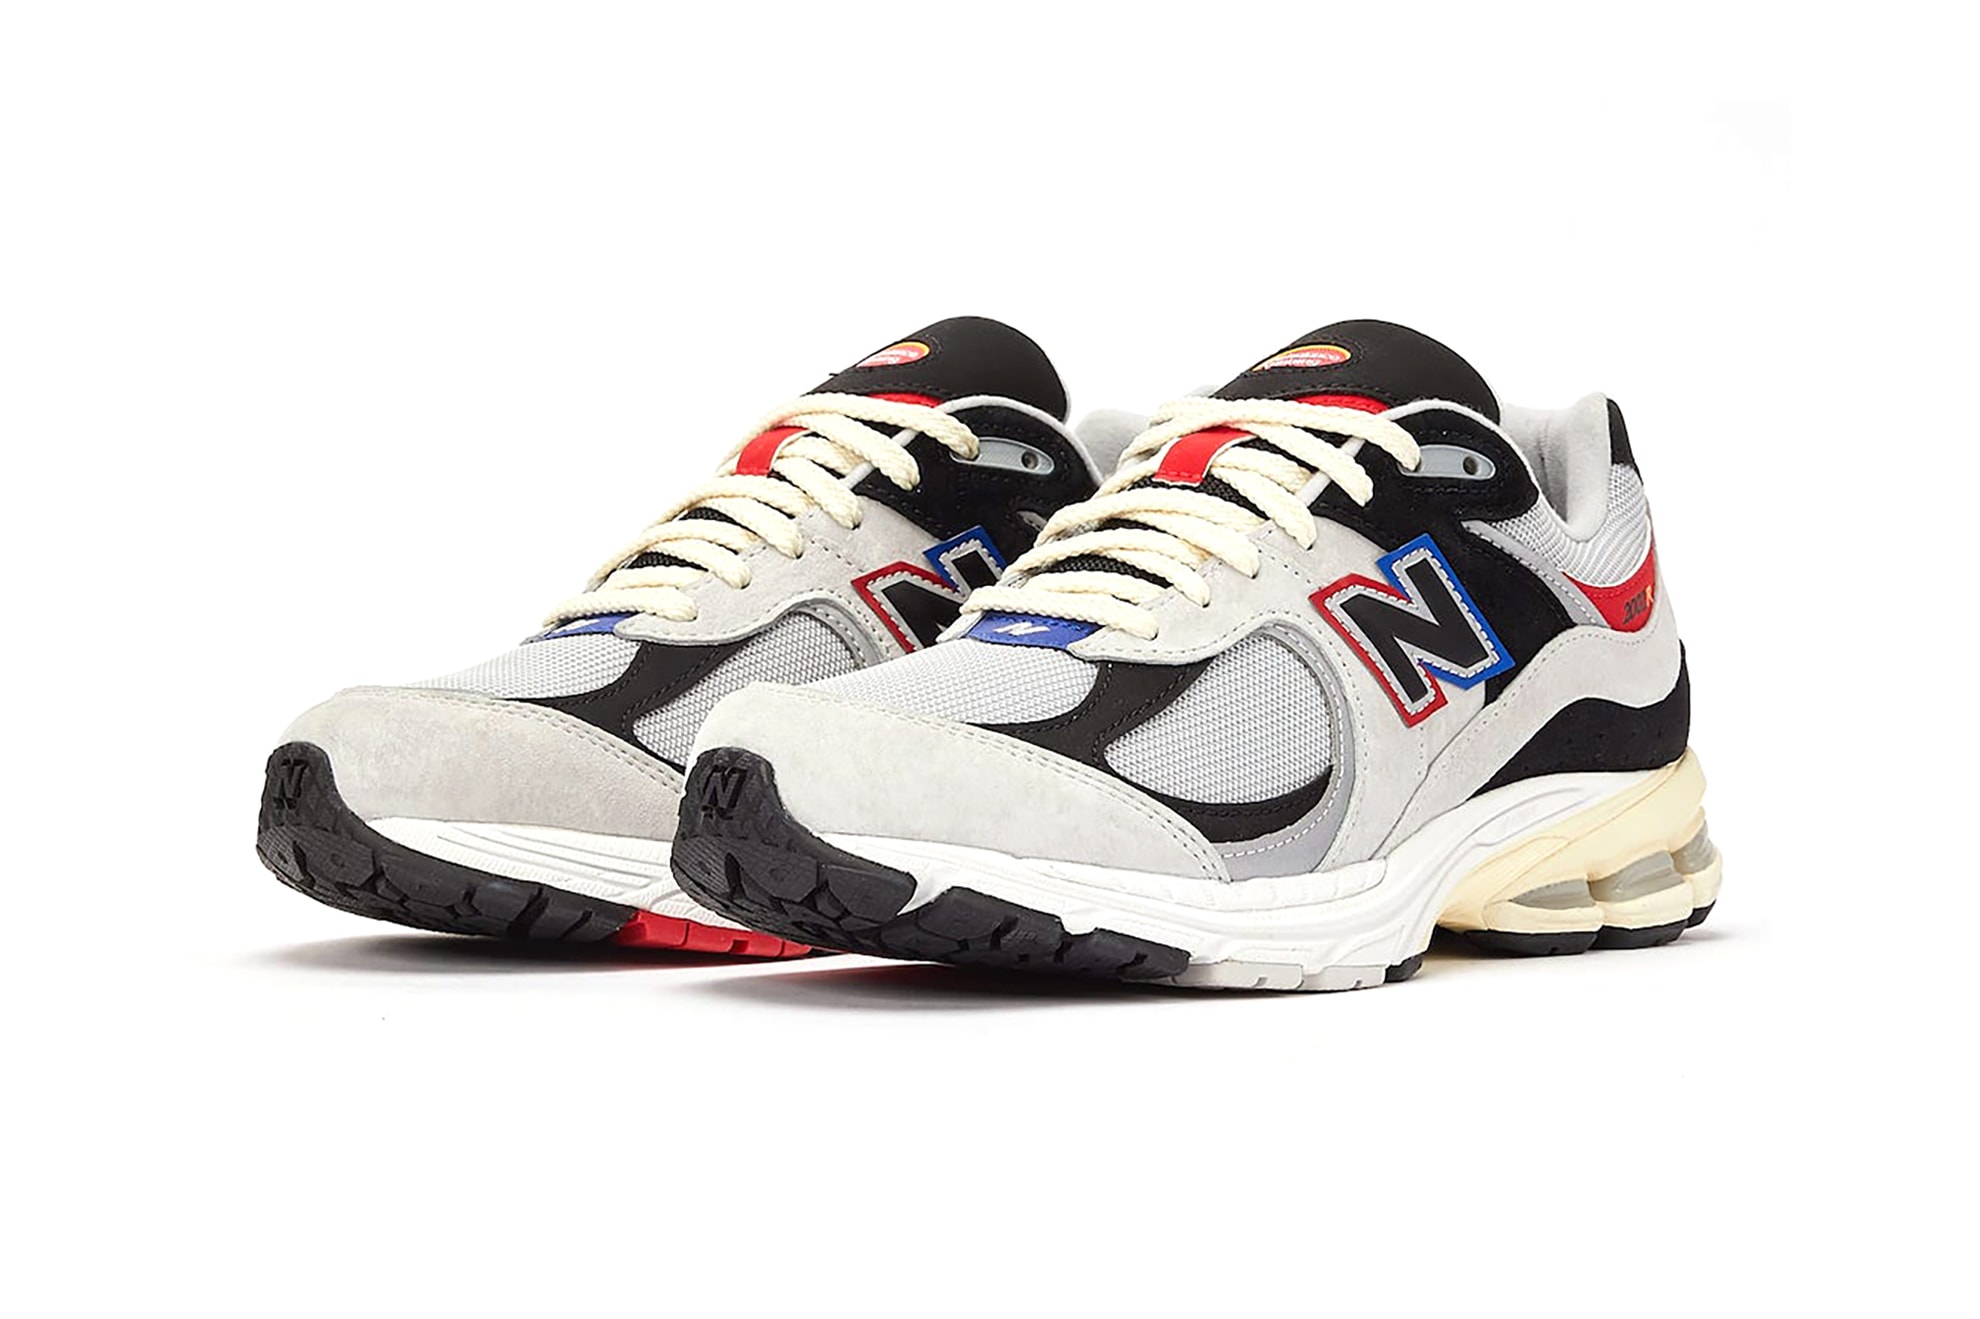 DTLR x New Balance 2002R「Lovers Only」全新聯名鞋款發佈